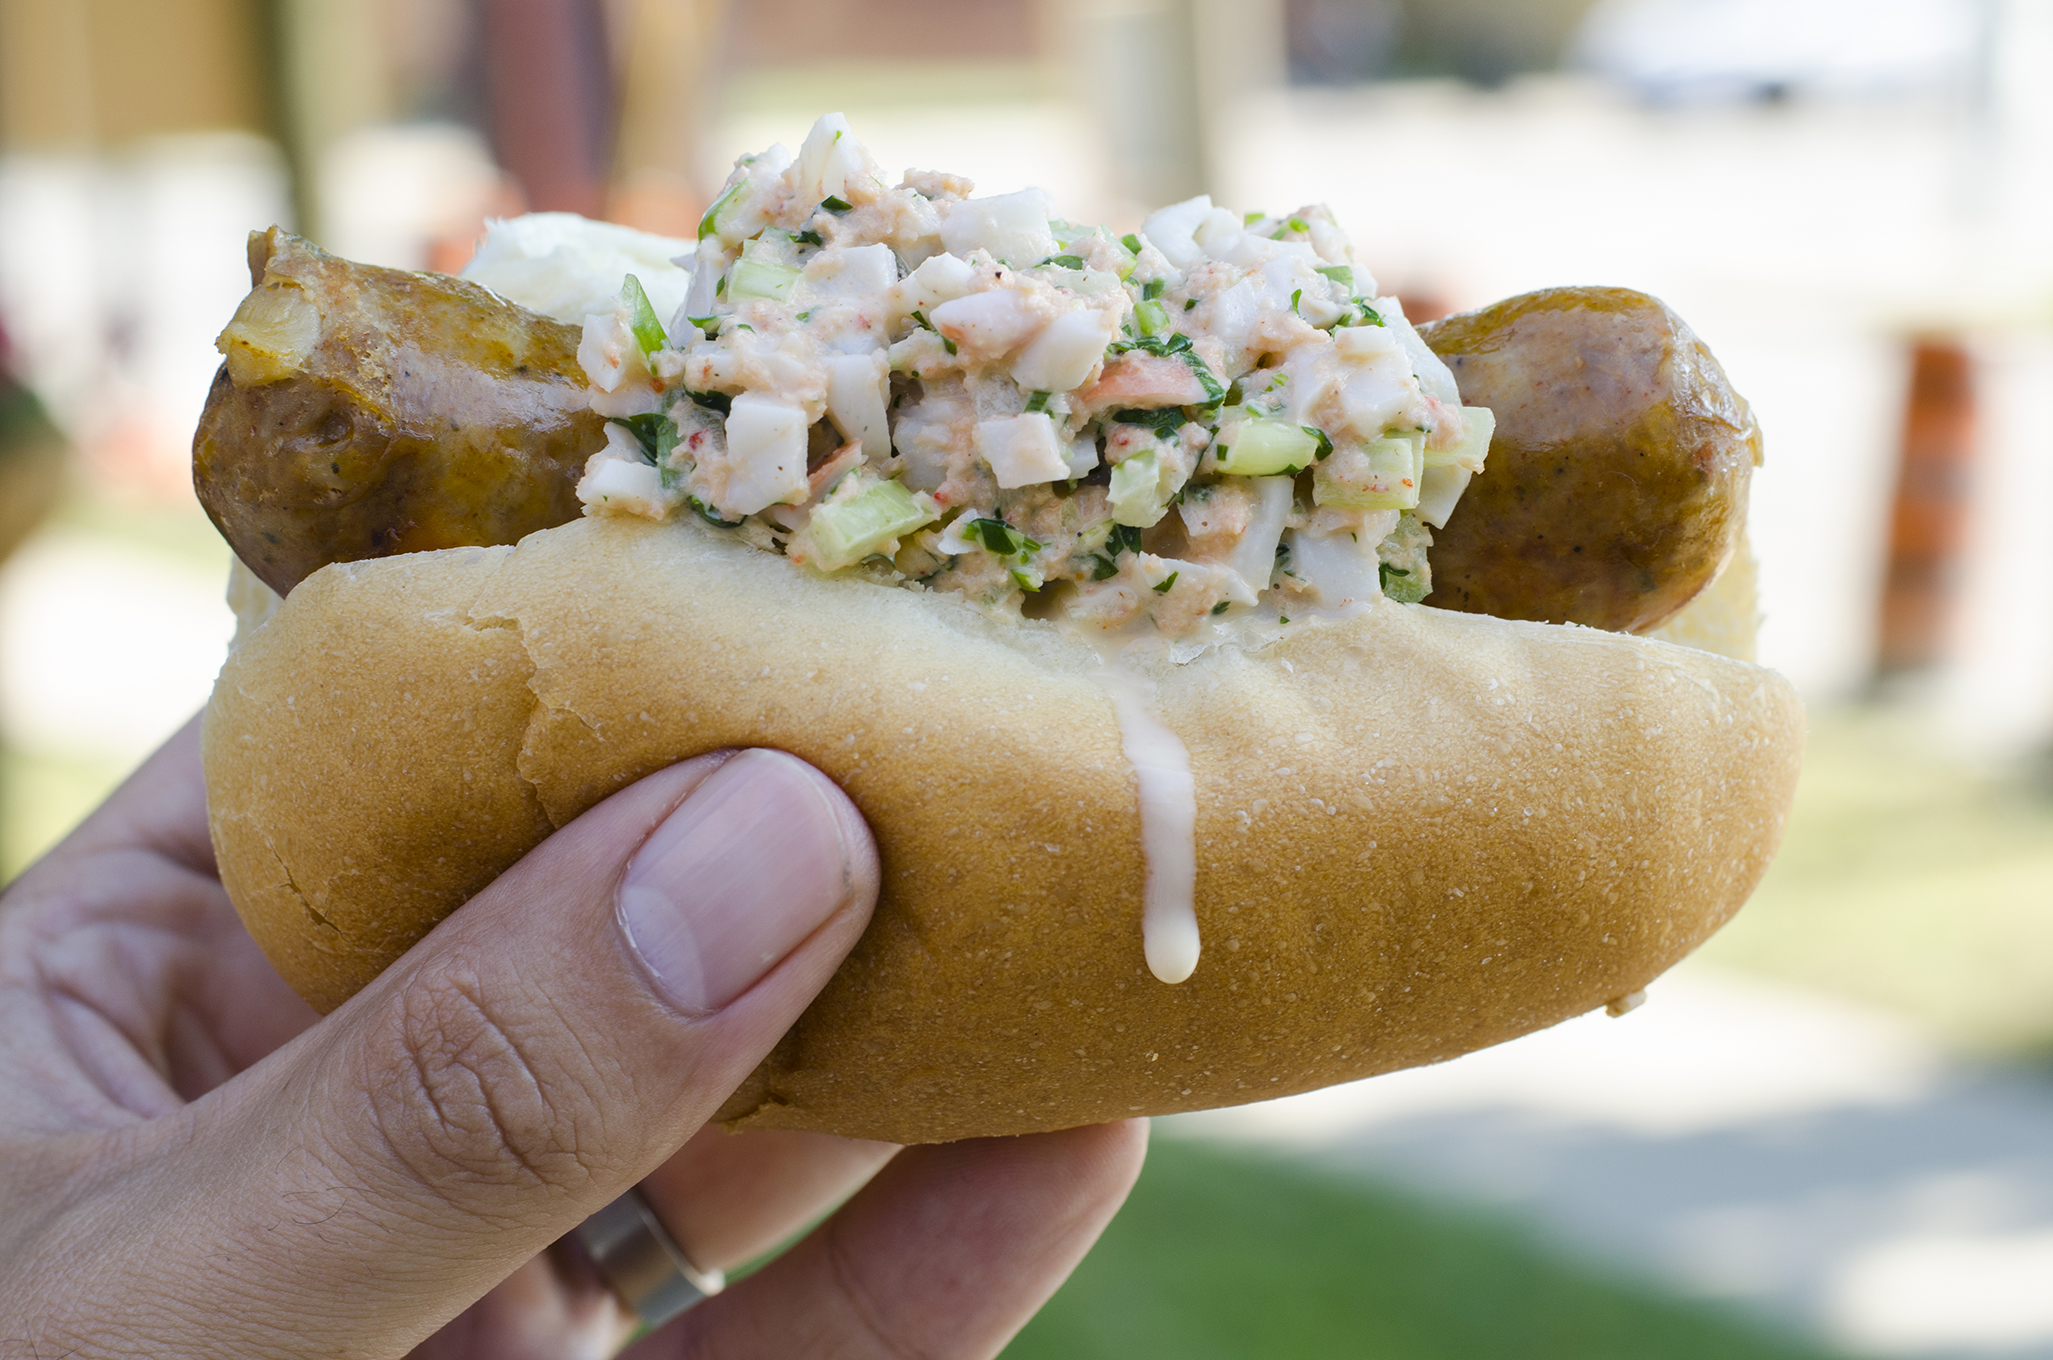 The Cadillac Mac sausage topped with lobster from Robbie's Gourmet Sausage Co. in Windsor, Ontario.